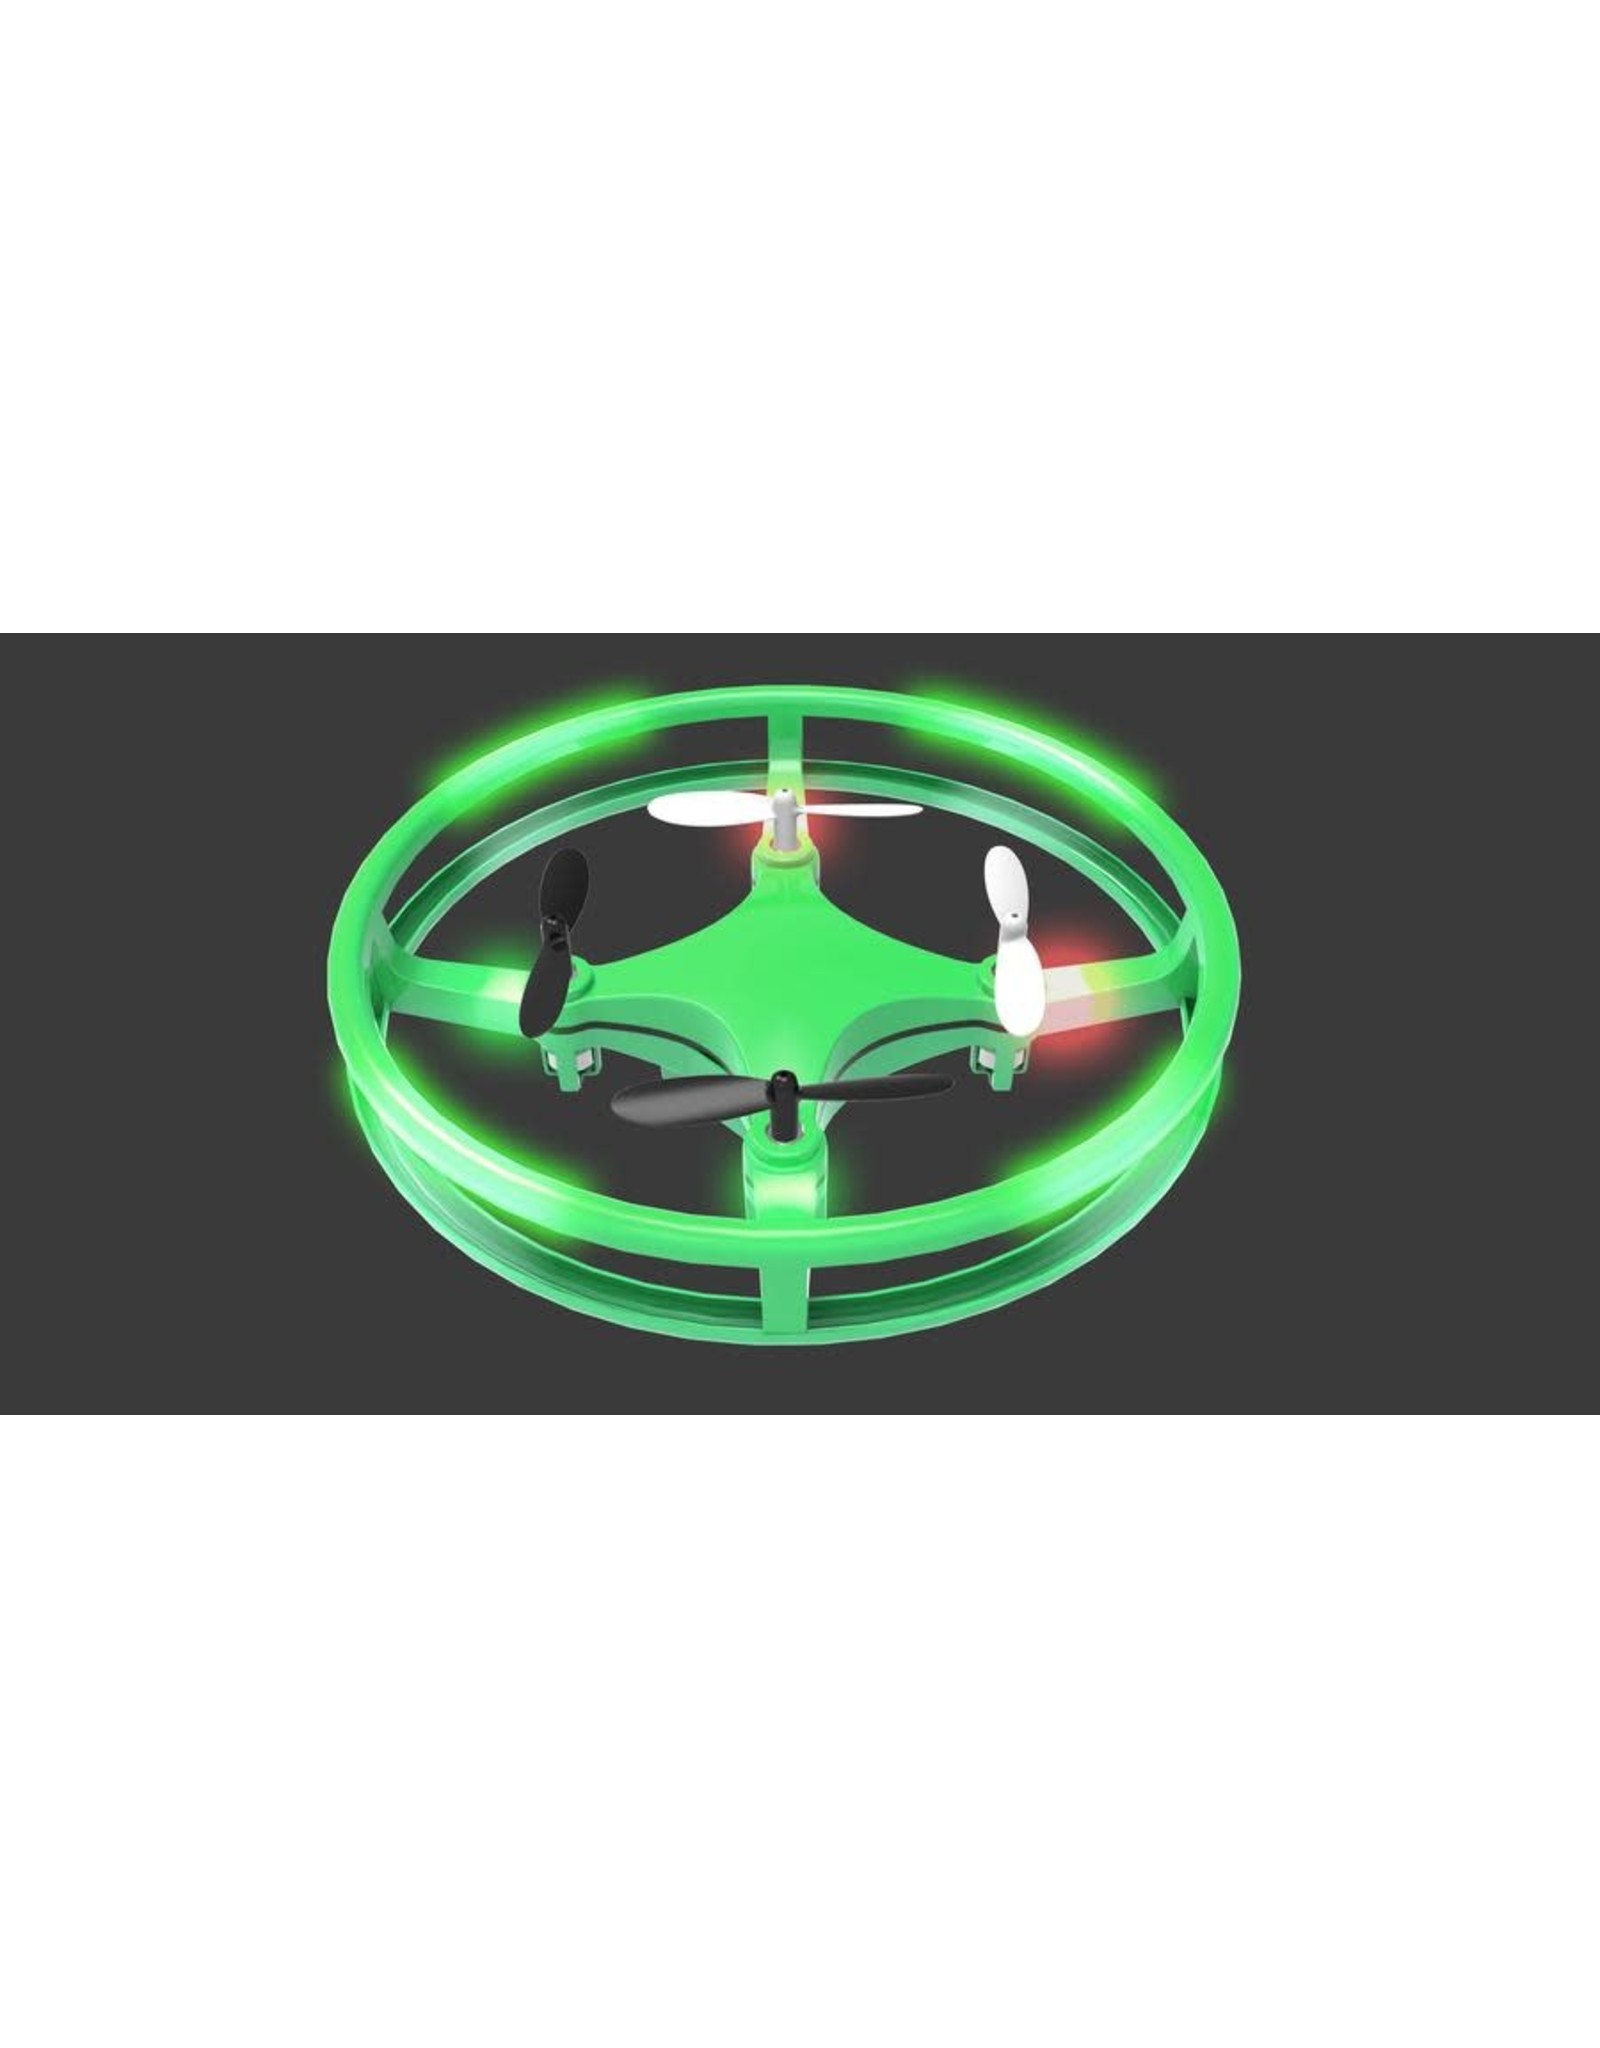 Disc Drone Green